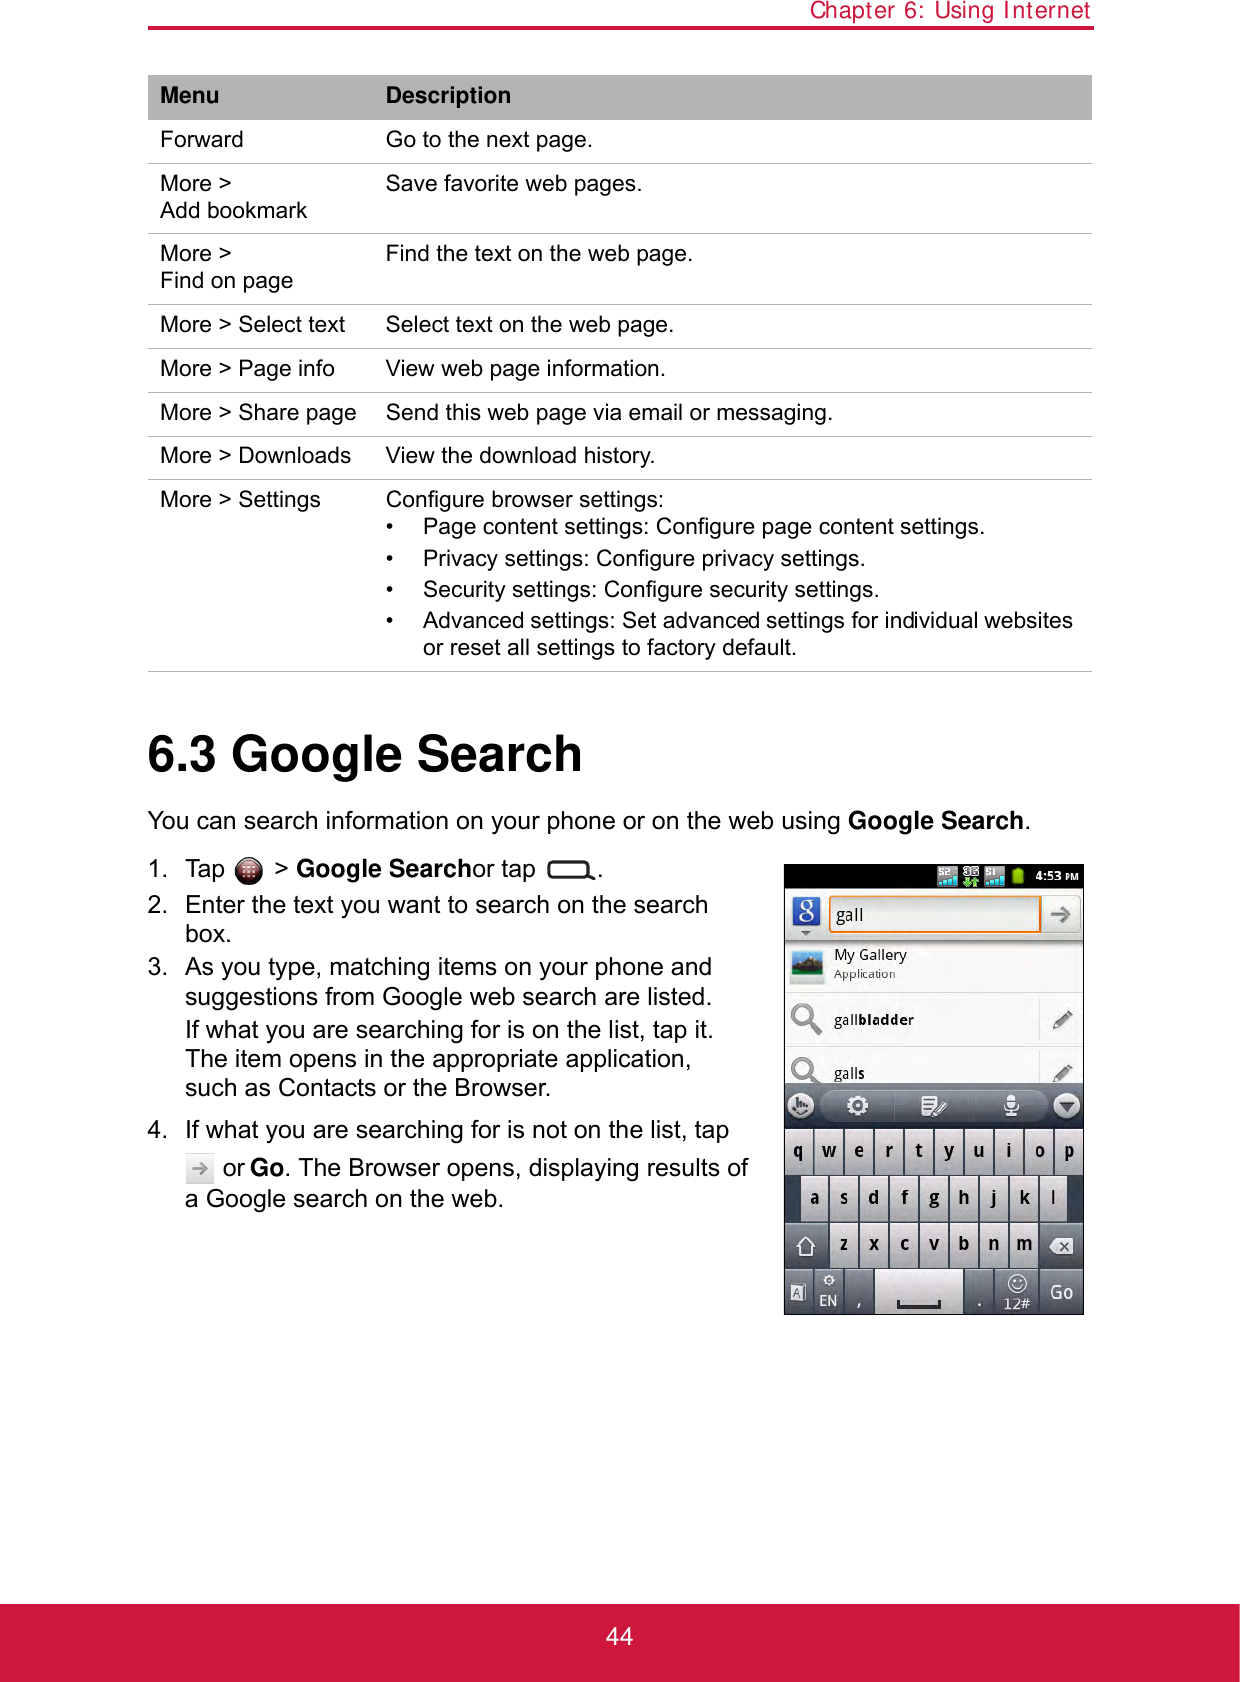 Chapter 6: Using Internet446.3 Google SearchYou can search information on your phone or on the web using Google Search. 1. Tap  &gt; Google Searchor tap  .2. Enter the text you want to search on the search box.3. As you type, matching items on your phone and suggestions from Google web search are listed.If what you are searching for is on the list, tap it. The item opens in the appropriate application, such as Contacts or the Browser.4. If what you are searching for is not on the list, tap  or Go. The Browser opens, displaying results of a Google search on the web.Menu DescriptionForward Go to the next page.More &gt; Add bookmarkSave favorite web pages.More &gt; Find on pageFind the text on the web page.More &gt; Select text Select text on the web page.More &gt; Page info View web page information.More &gt; Share page Send this web page via email or messaging.More &gt; Downloads View the download history.More &gt; Settings Configure browser settings:• Page content settings: Configure page content settings.• Privacy settings: Configure privacy settings.• Security settings: Configure security settings.• Advanced settings: Set advanced settings for individual websites or reset all settings to factory default.